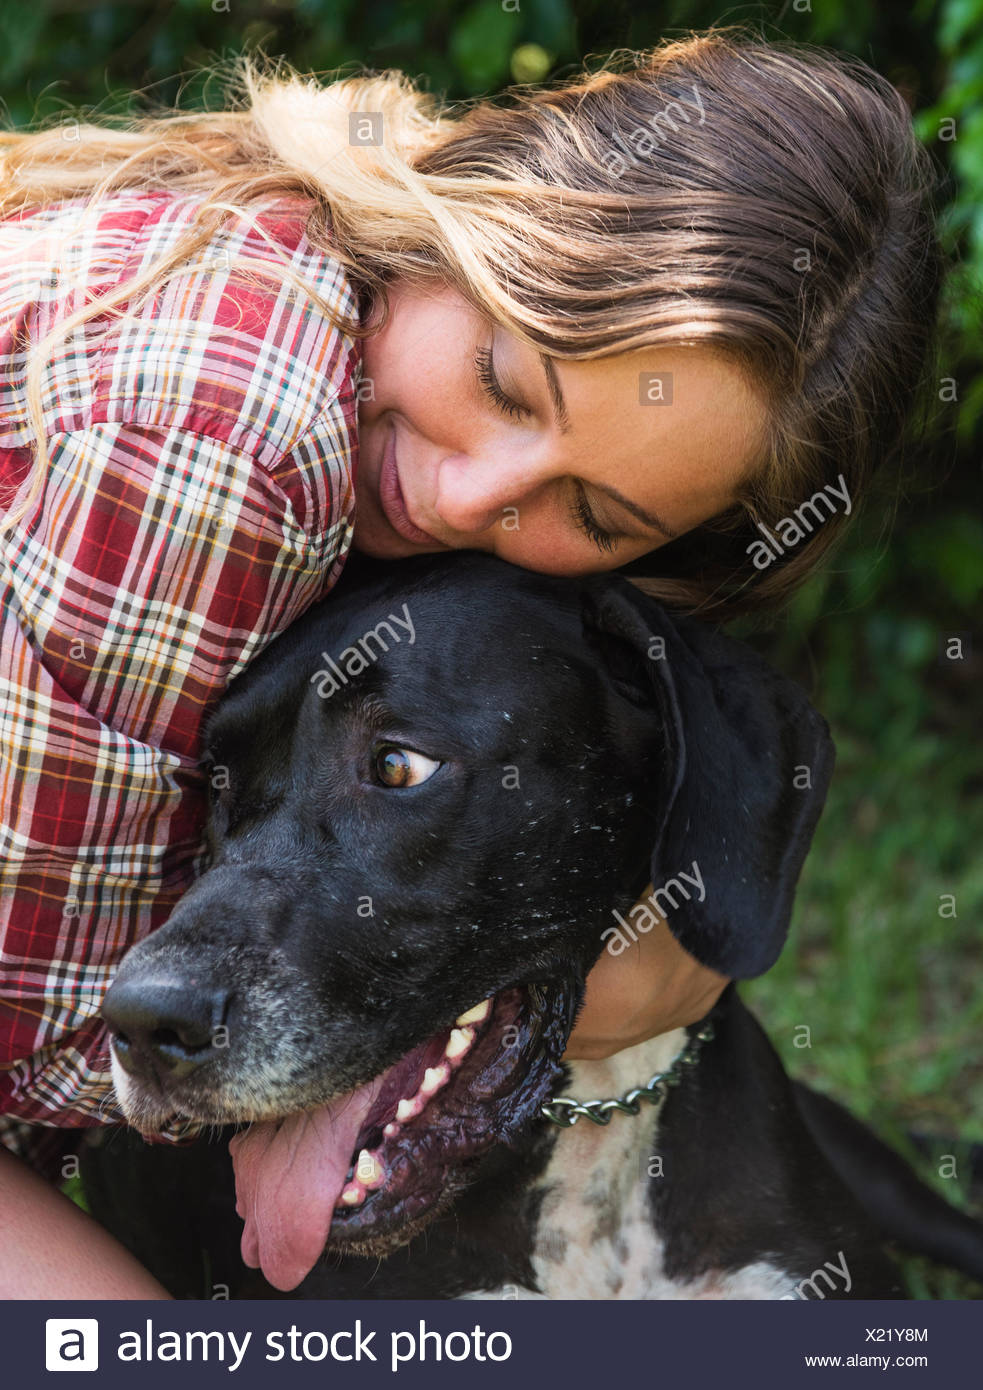 Woman Great Dane High Resolution Stock Photography and Images - Alamy